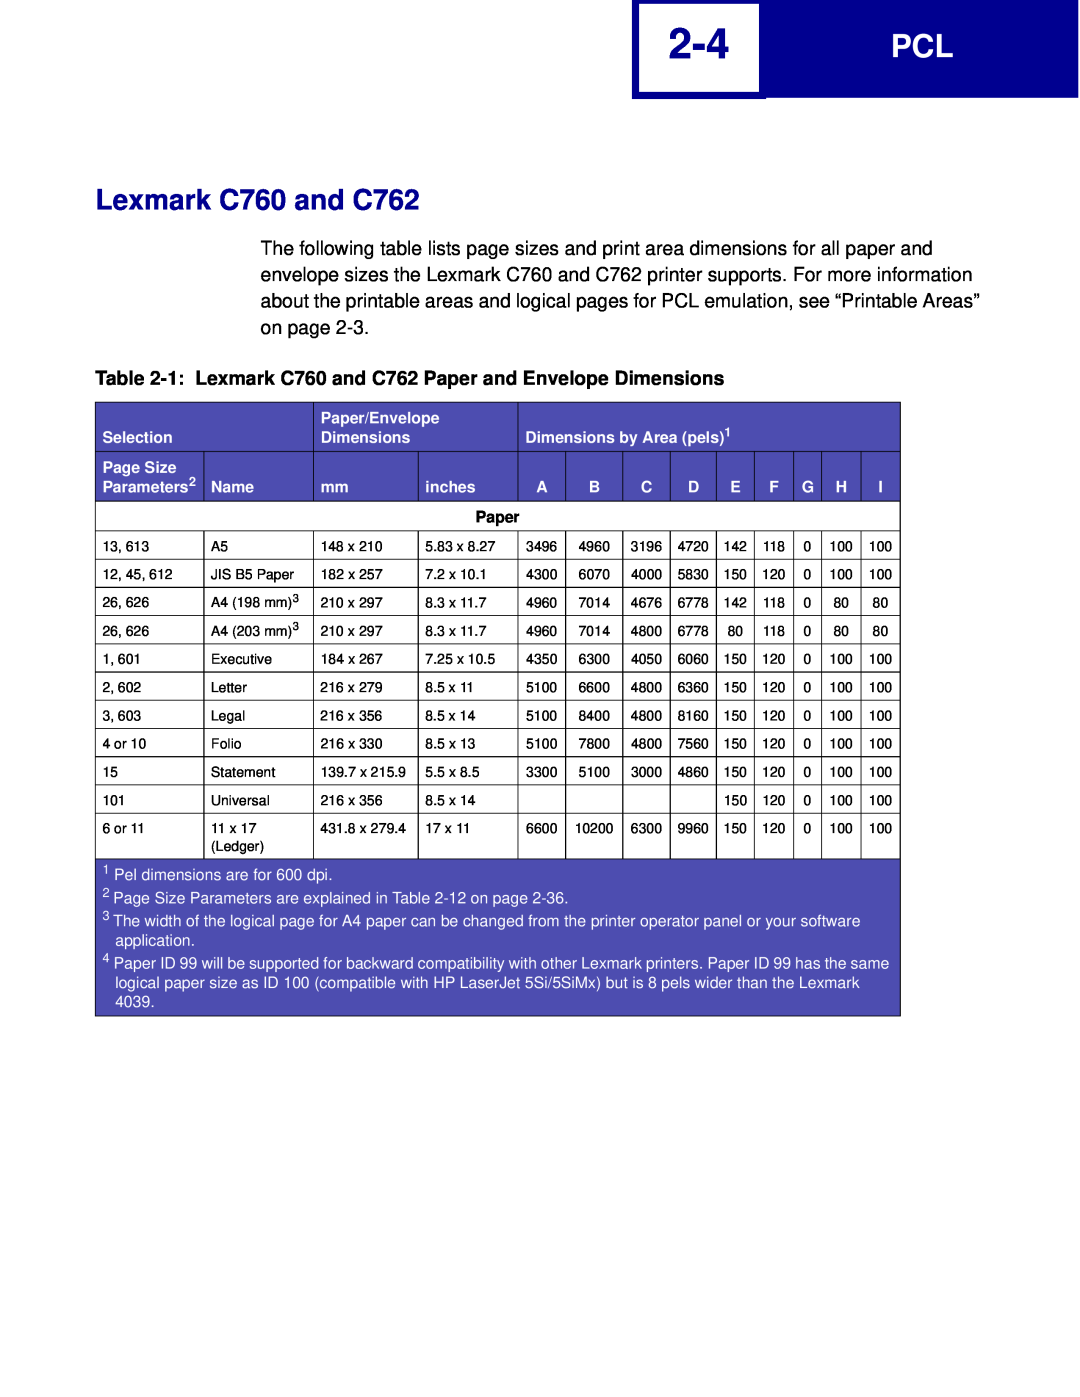 Lexmark manual 1 Lexmark C760 and C762 Paper and Envelope Dimensions, Pel dimensions are for 600 dpi 